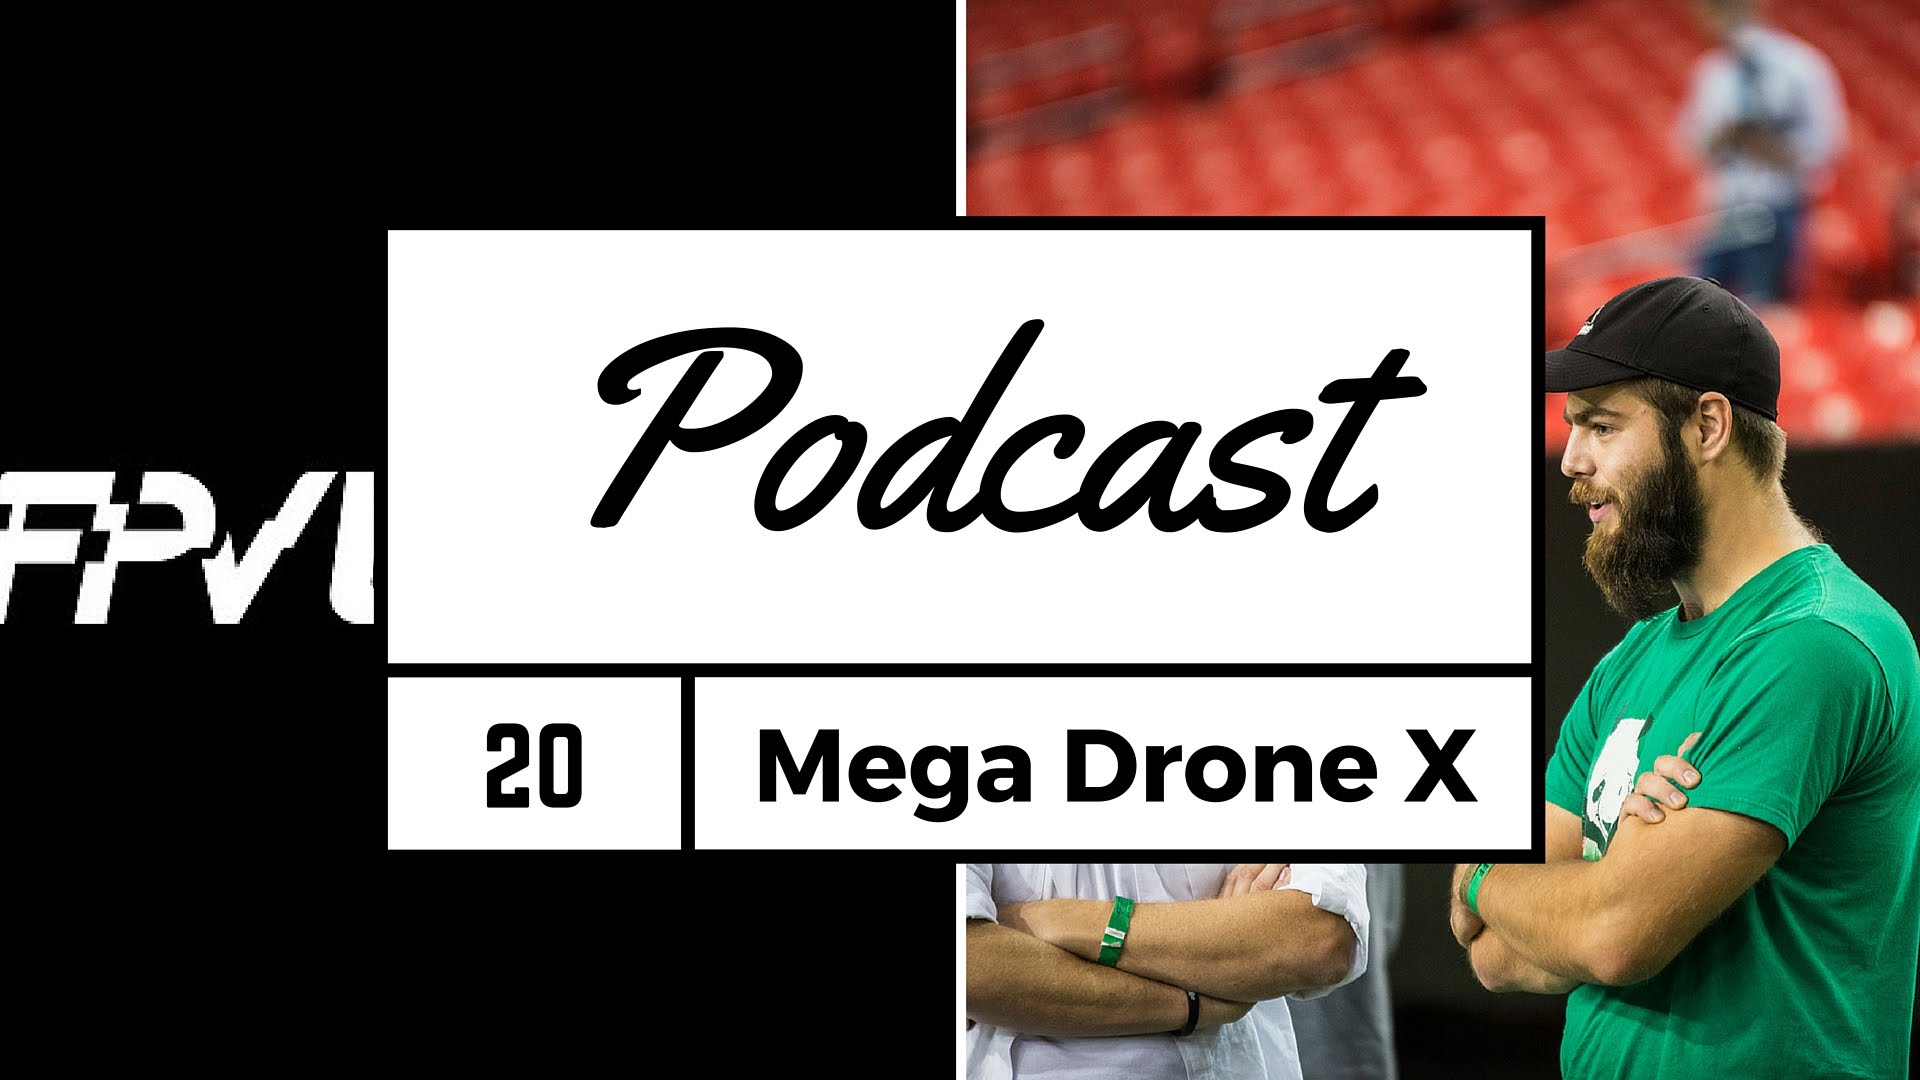 FPV Podcast 20 – Mega Drone X Preview with Bulbufet